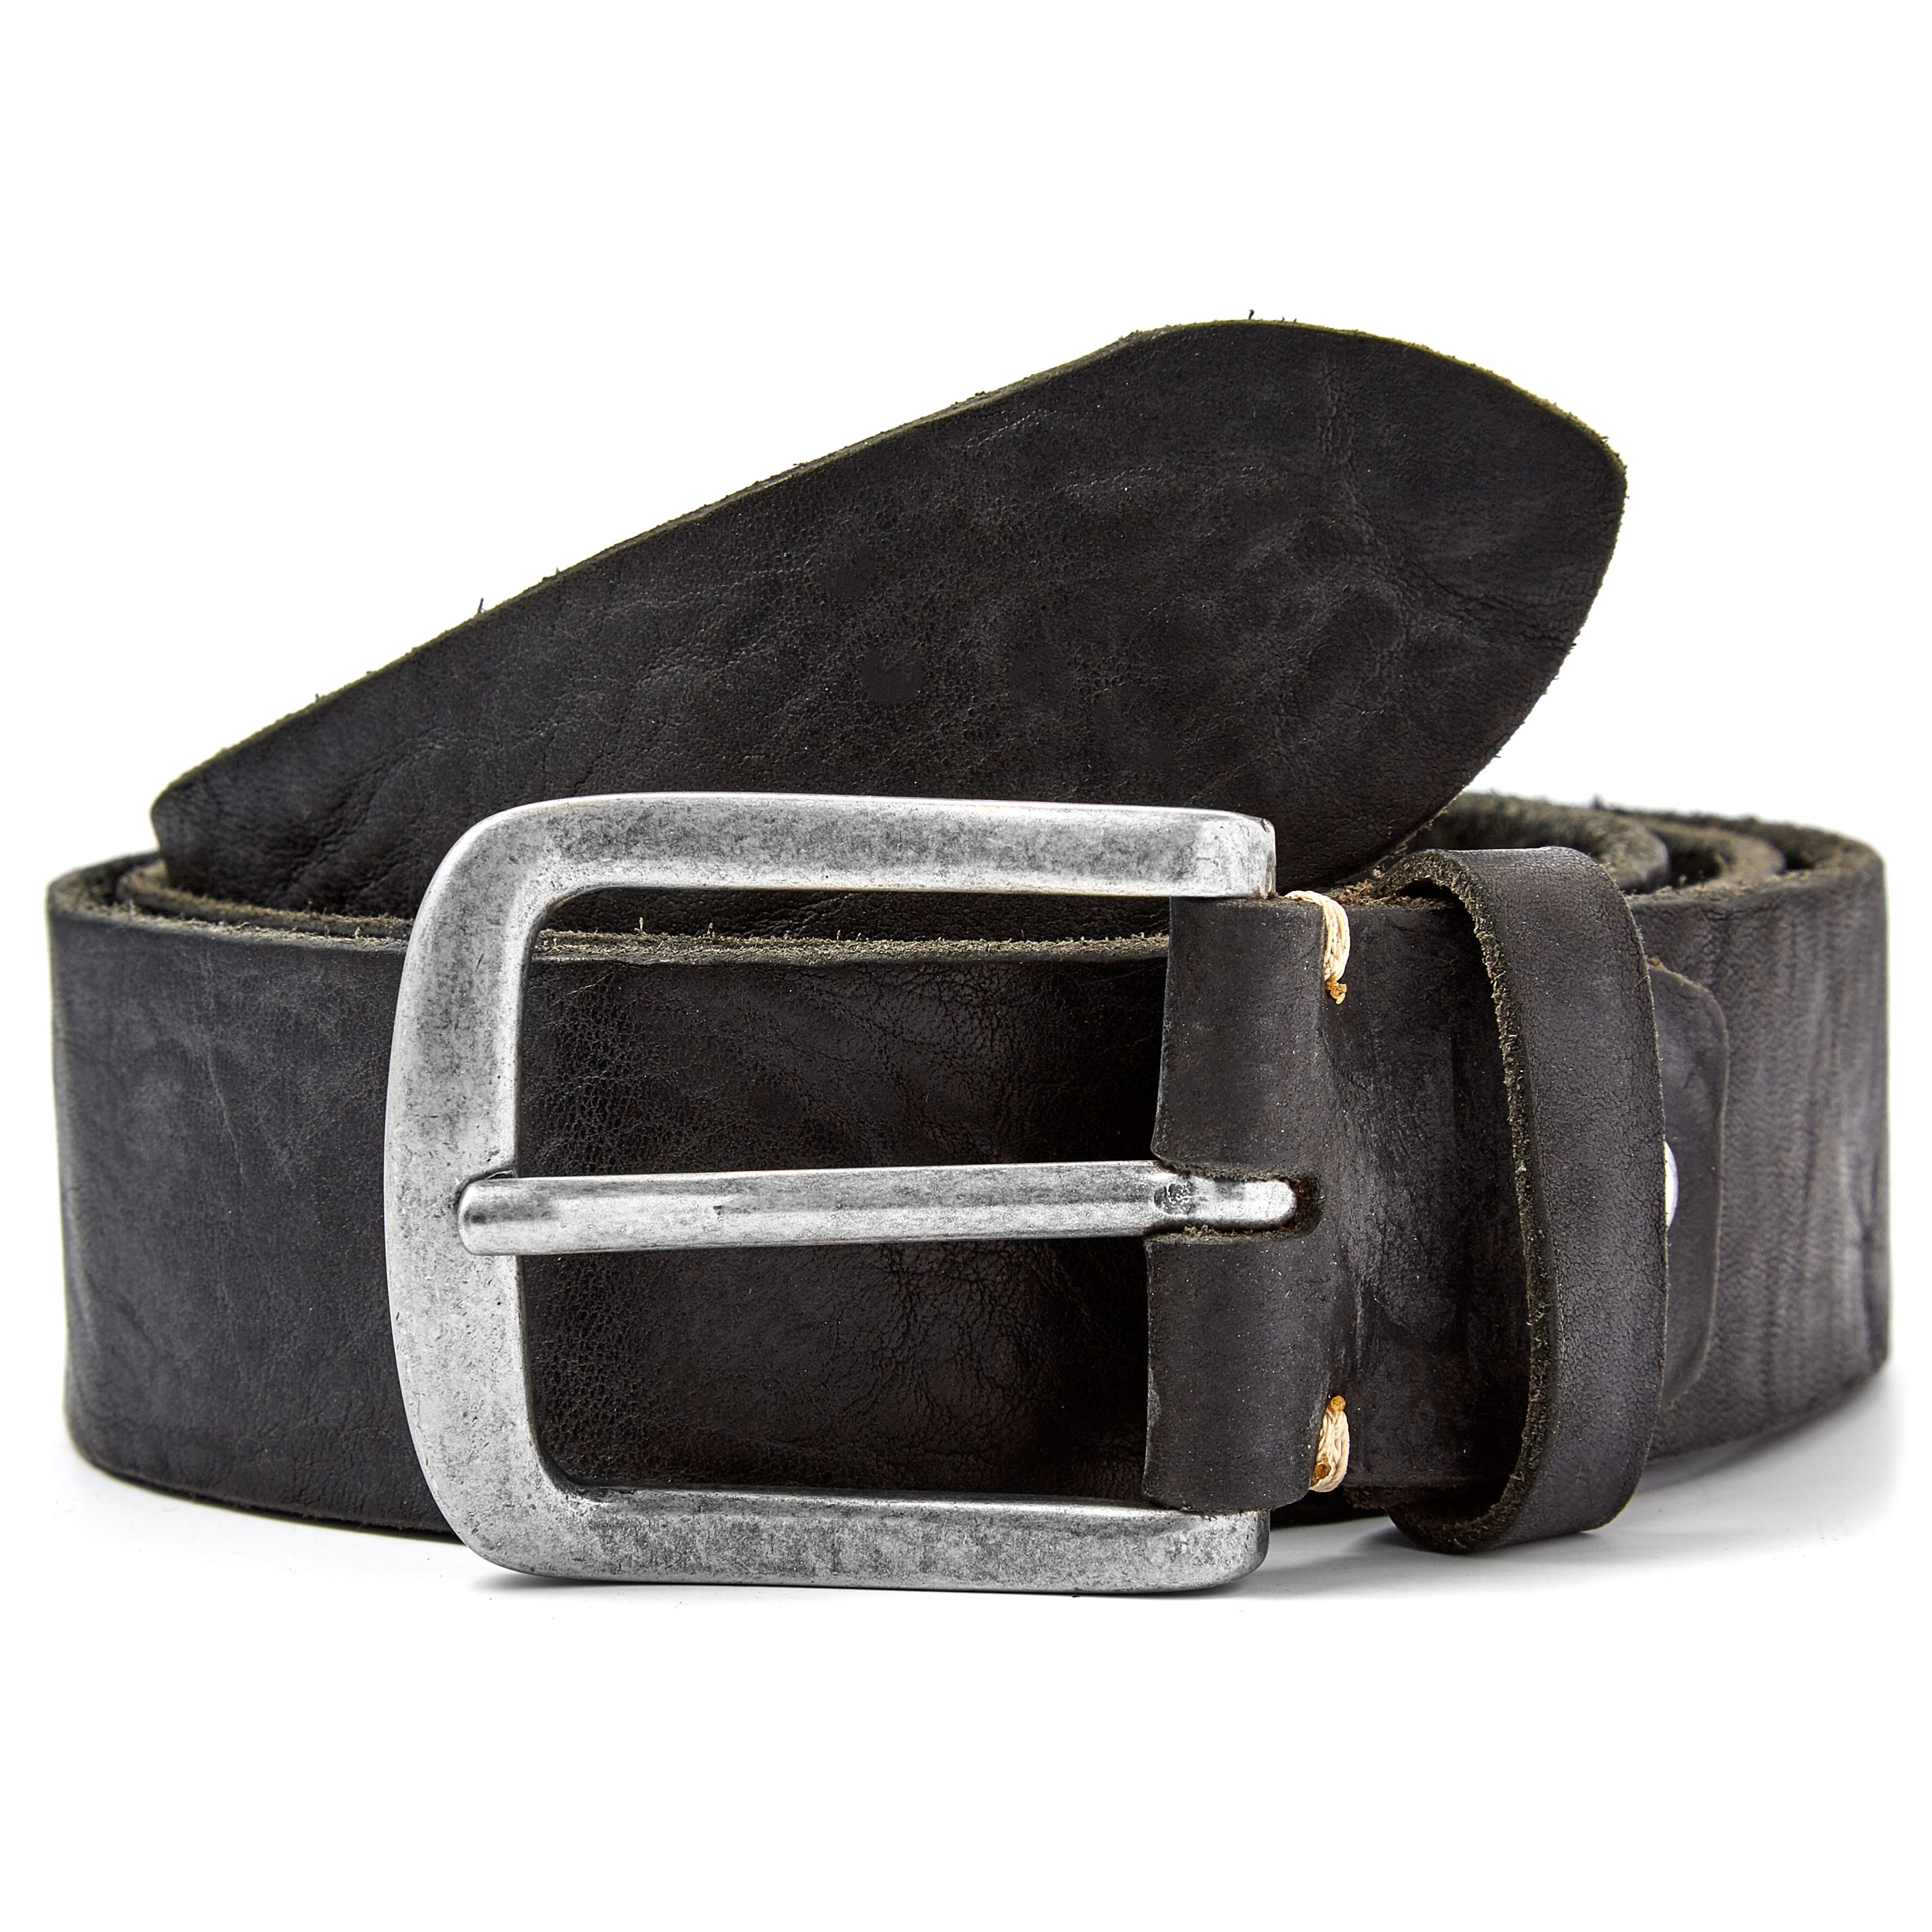 | Distressed Black Casual Leather BSWK Belt stock! In |